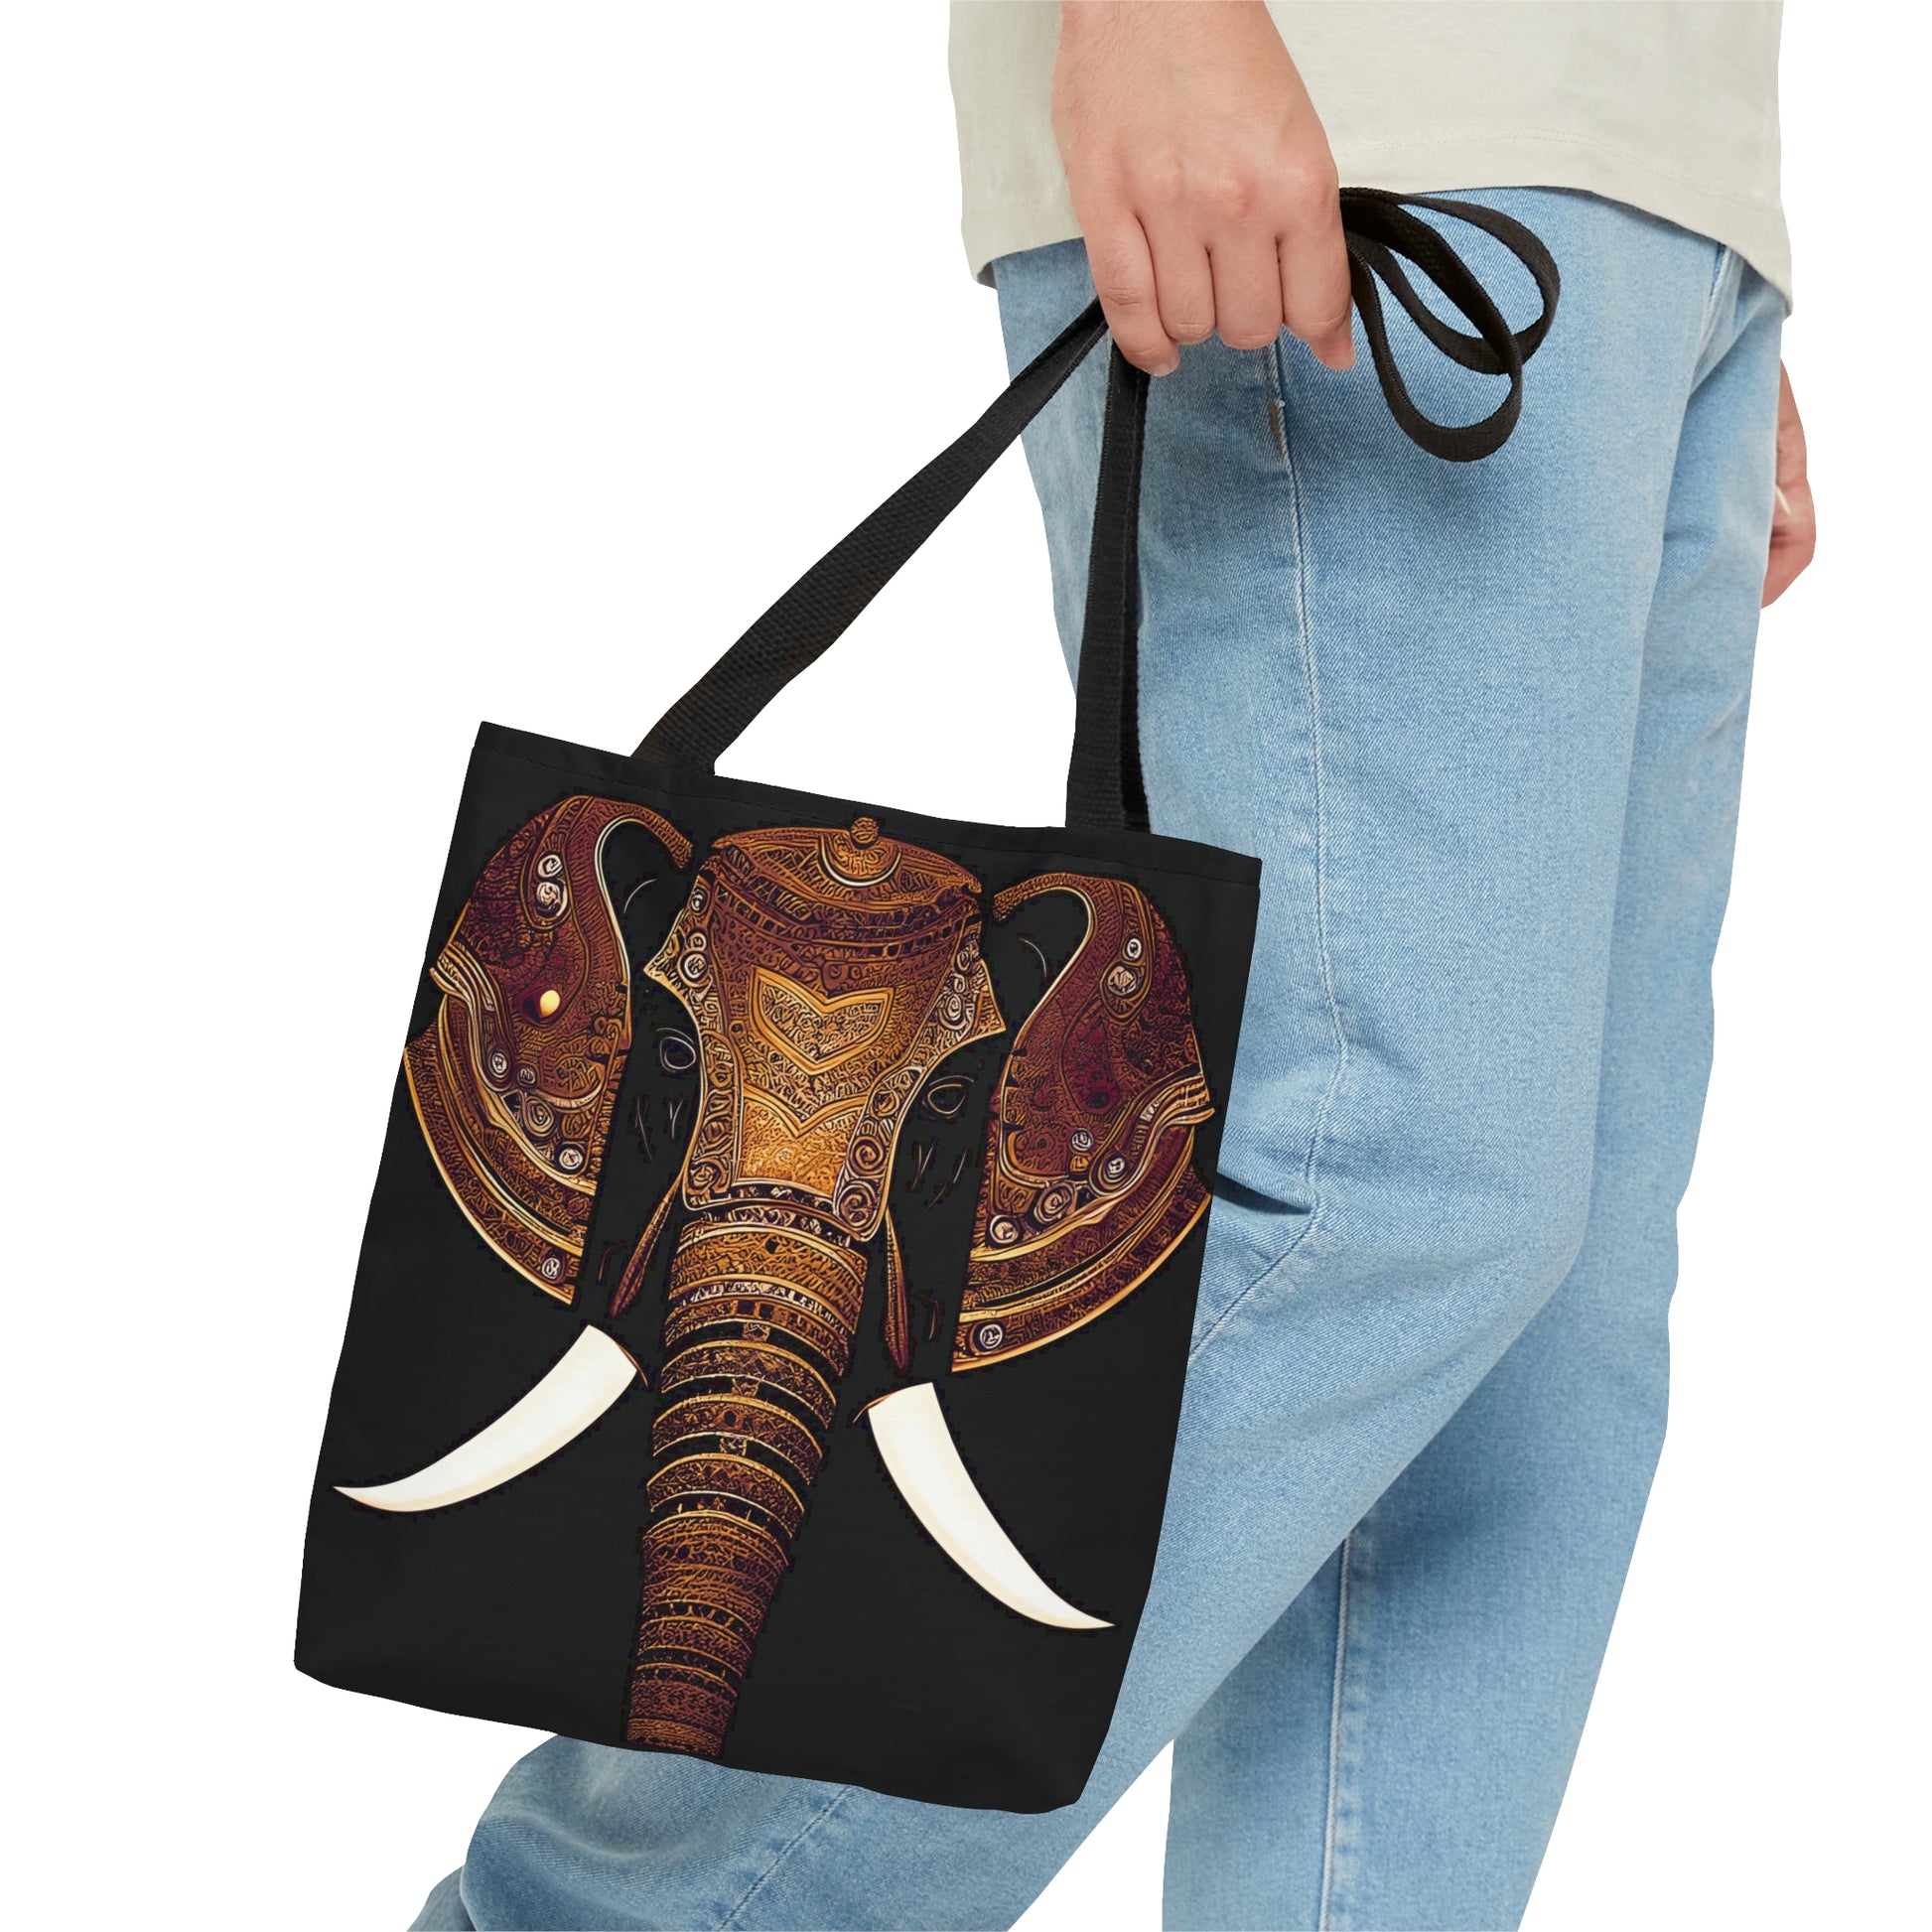 Indian Elephant Head With Parade Colors on Black Background tote bag small